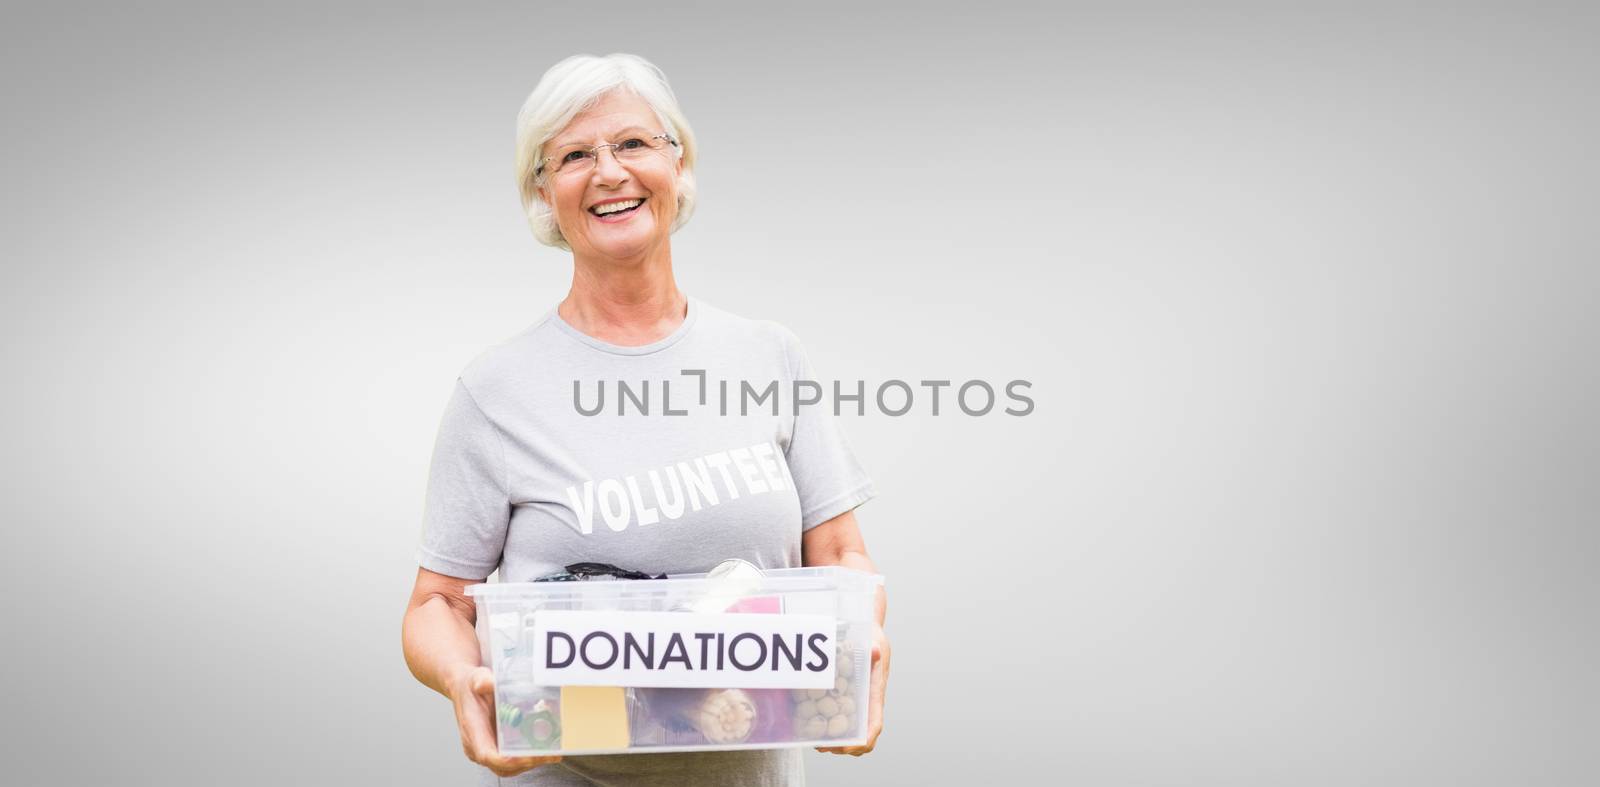 Happy grandmother holding donation box against grey vignette